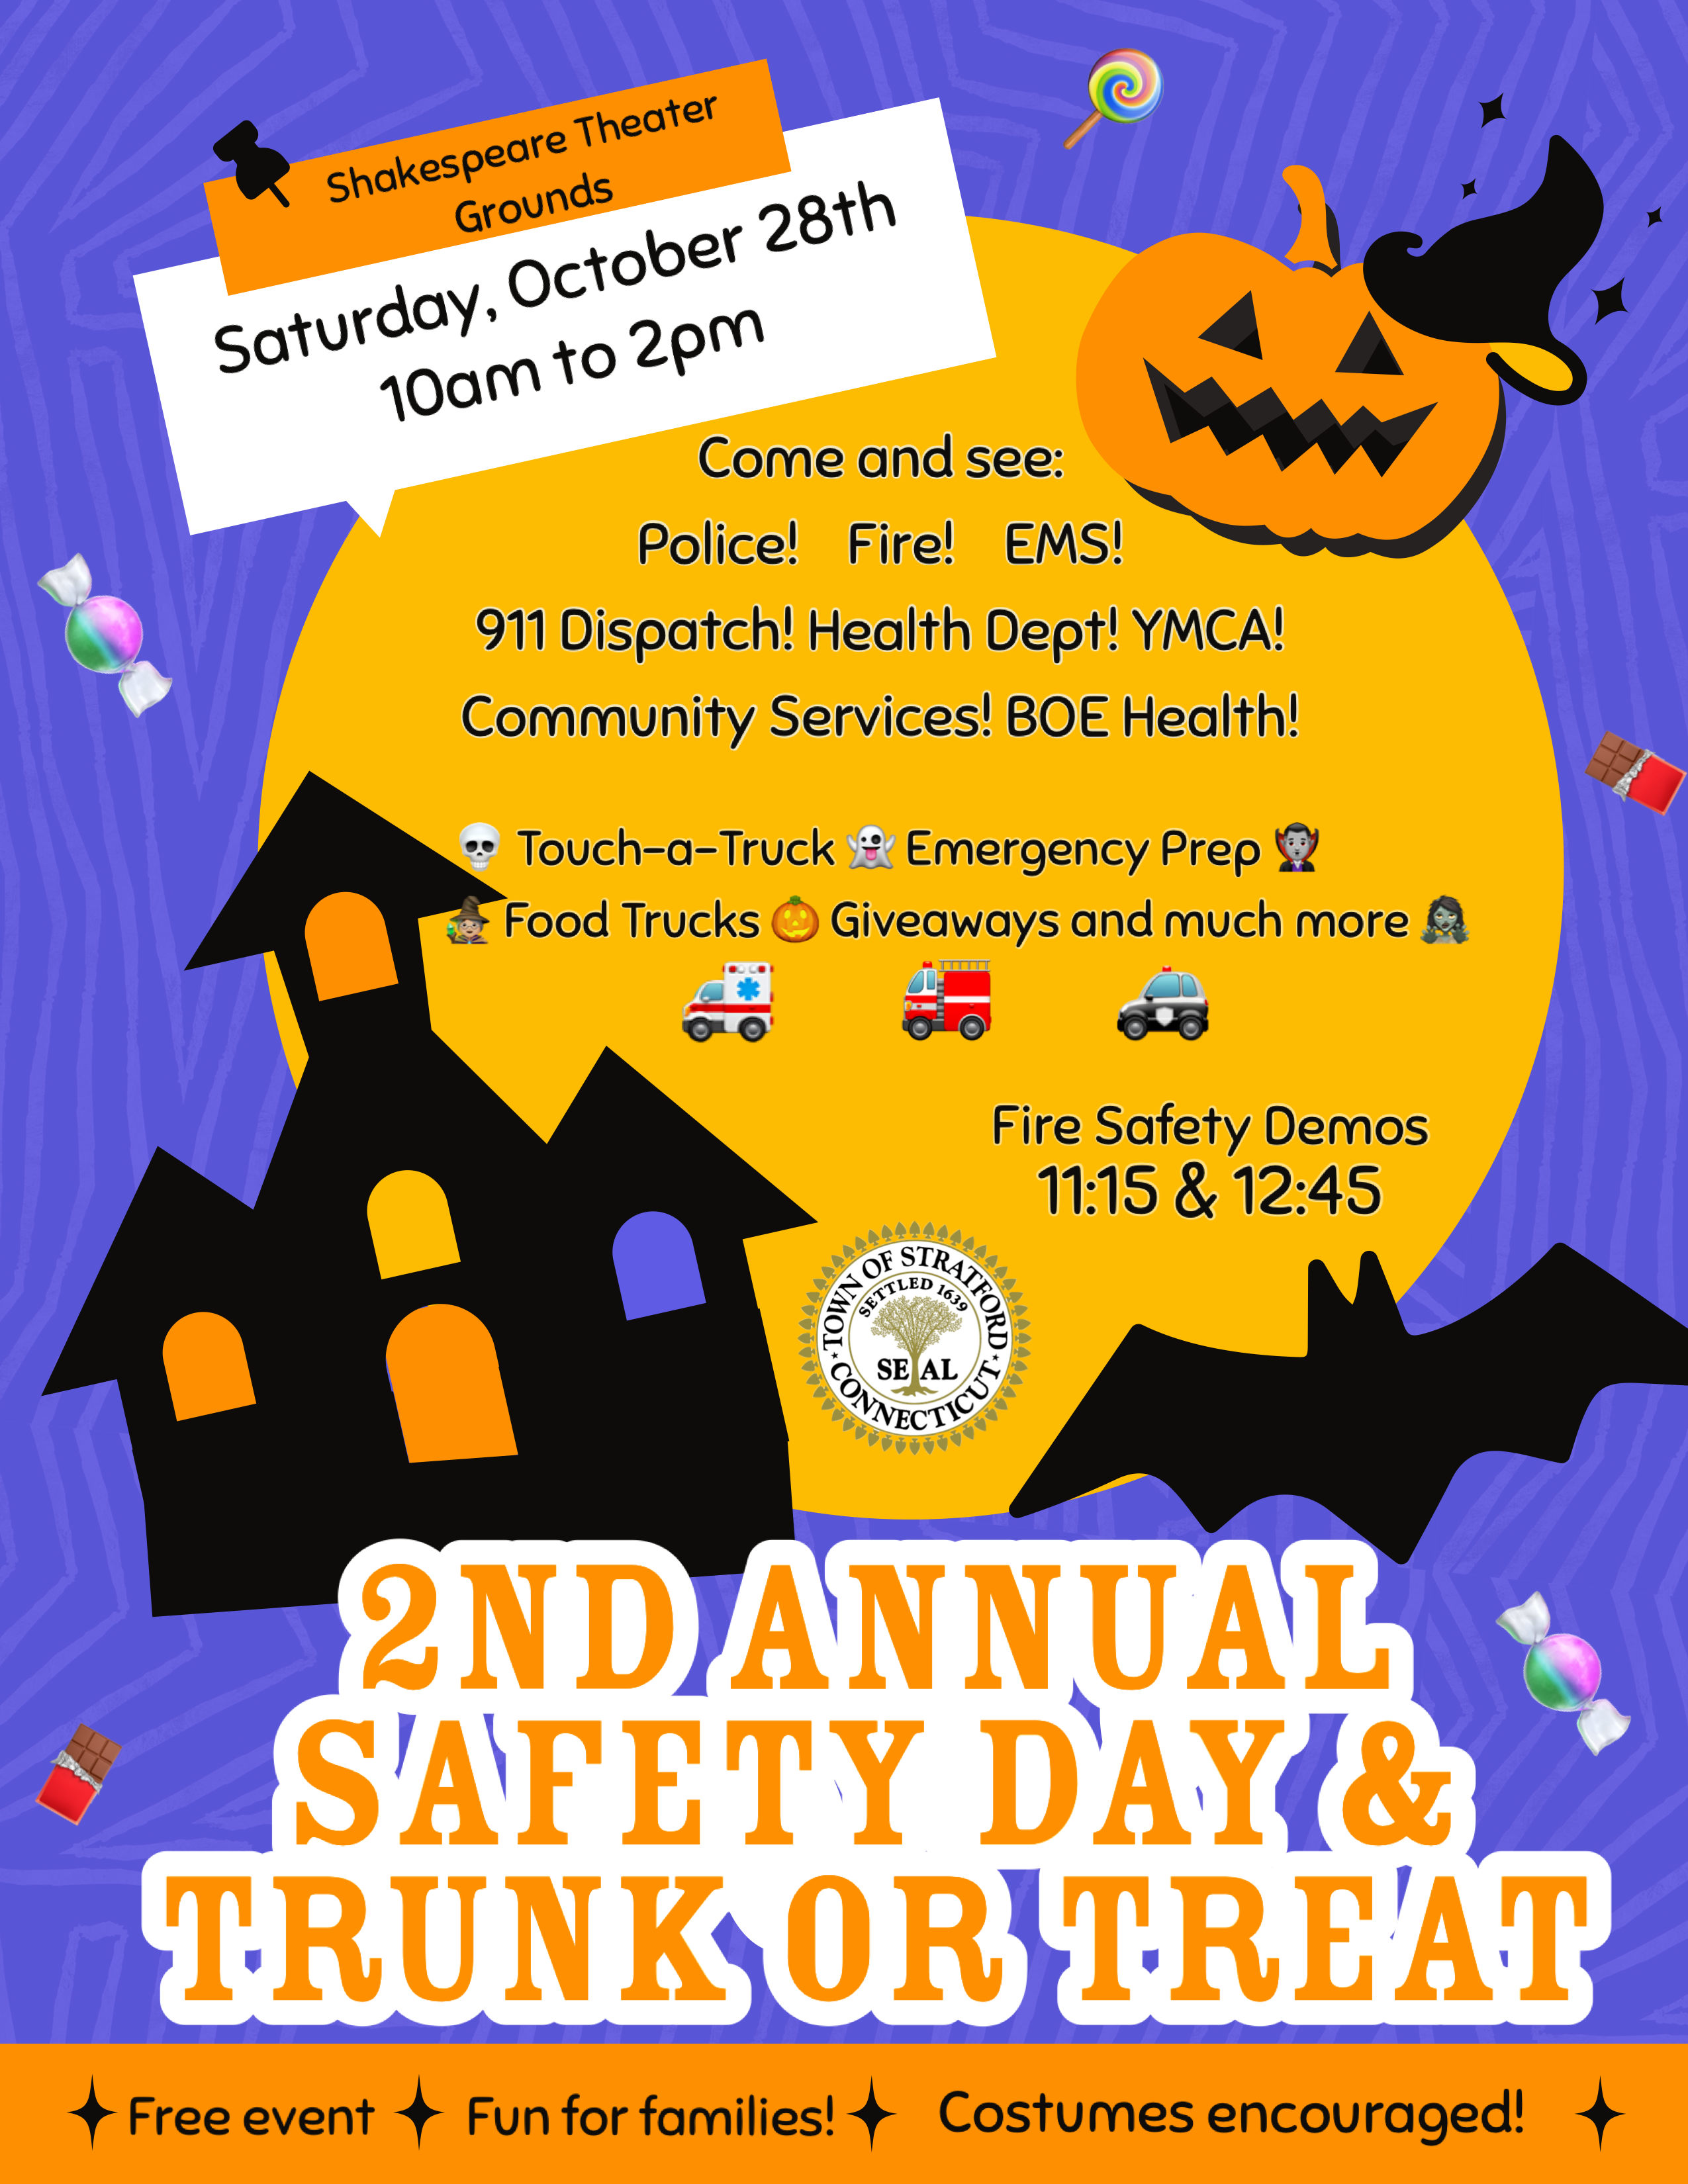 Safety Trunk or Treat